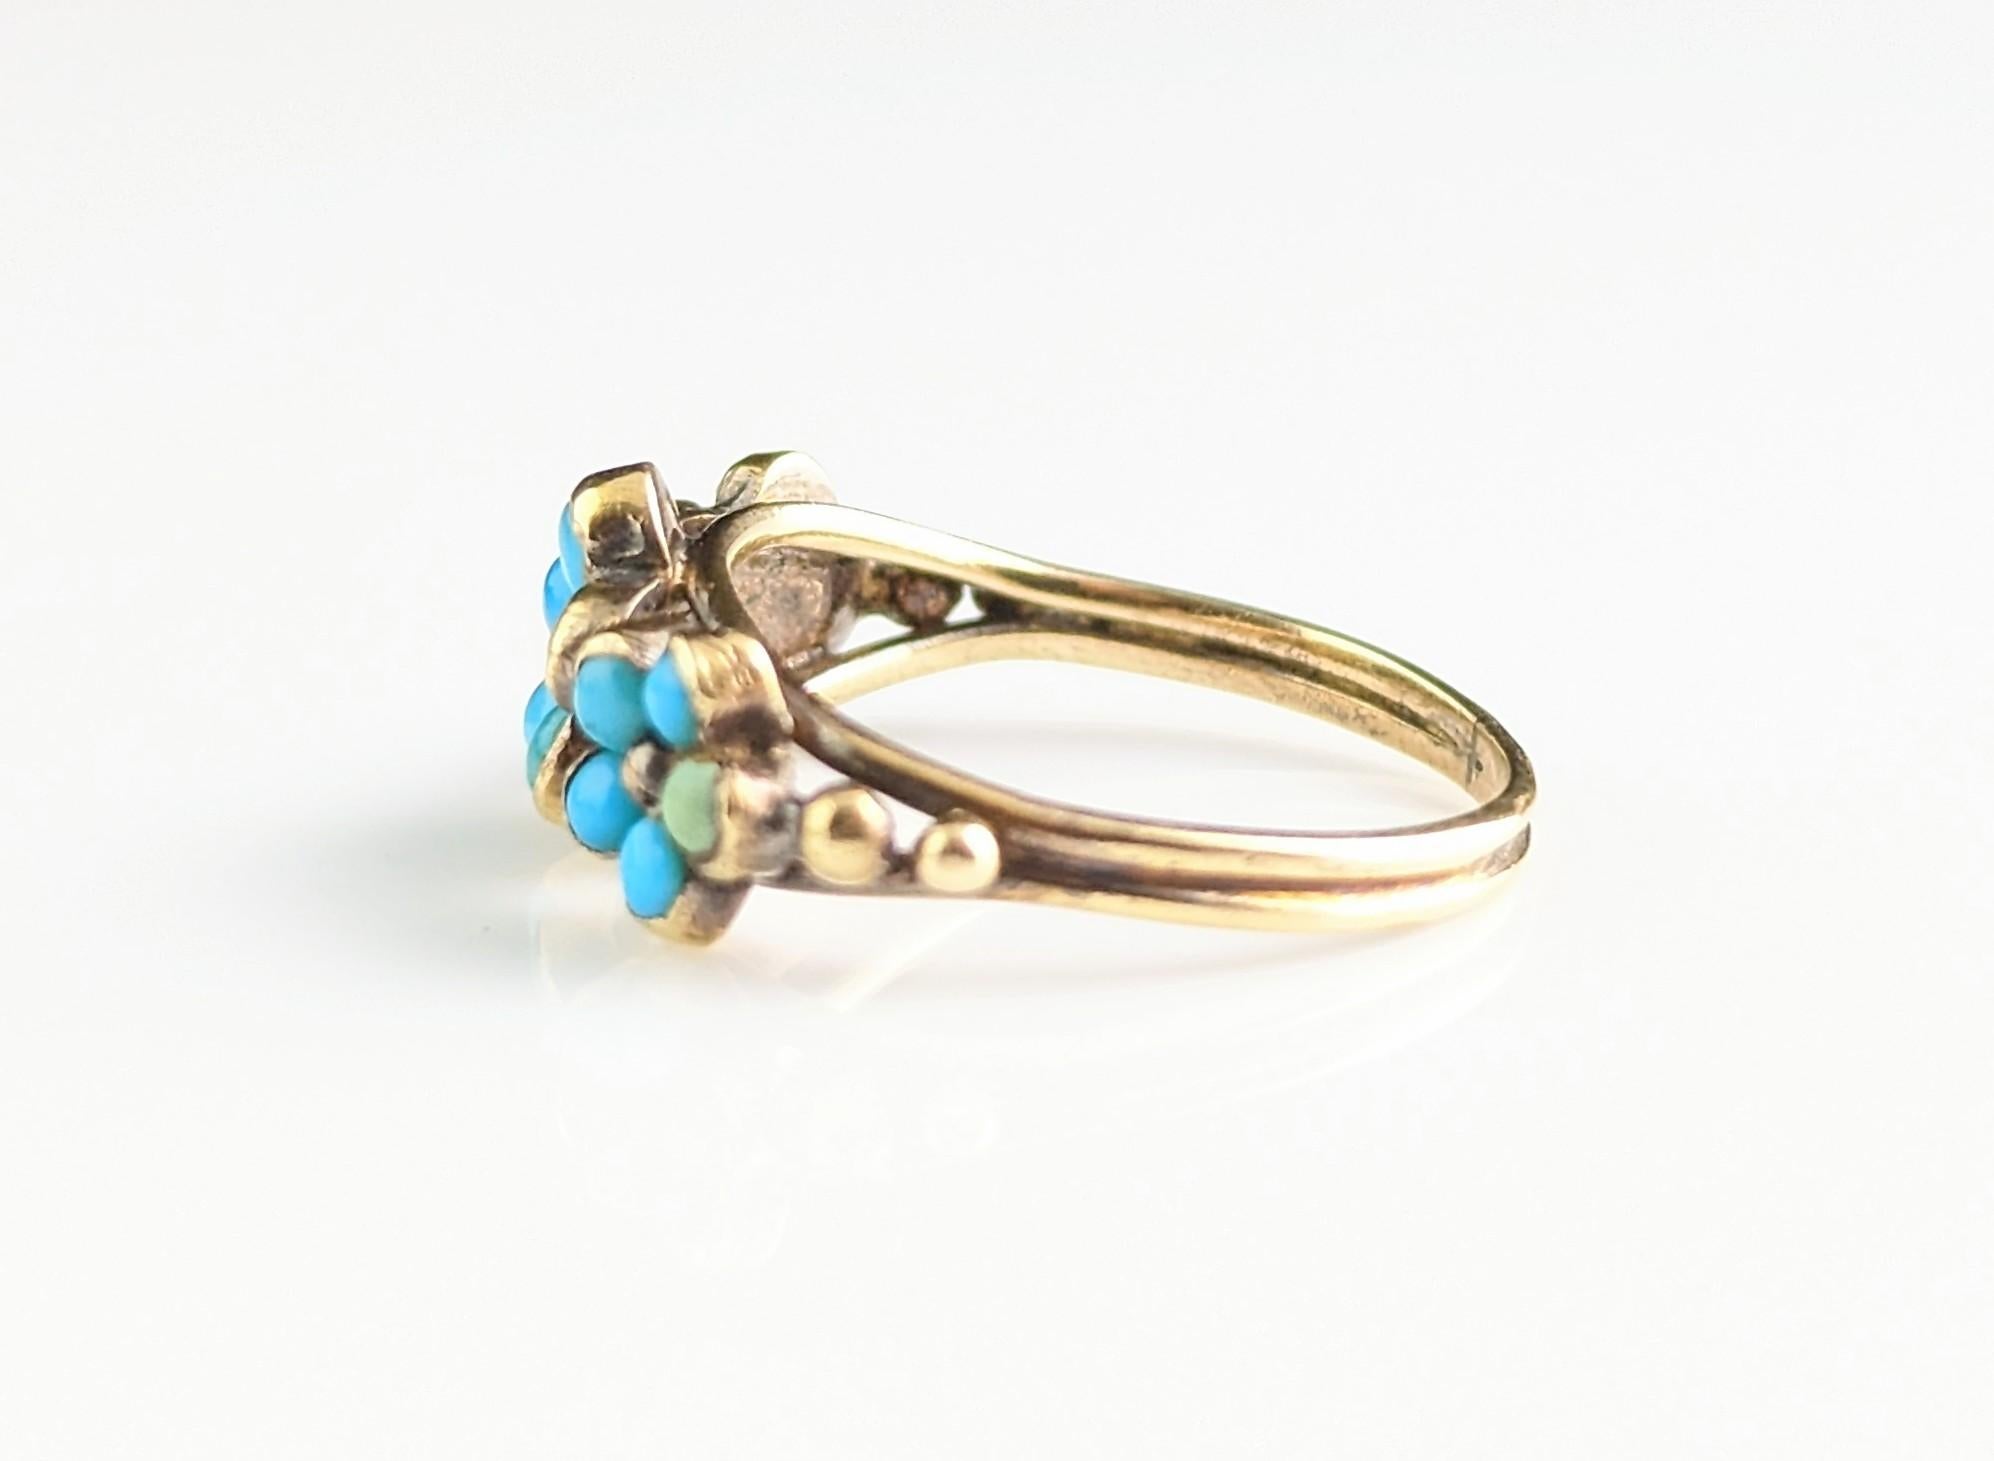 Antique Georgian Triple Flower Ring, Forget Me Not, 18k Gold and Turquoise 12